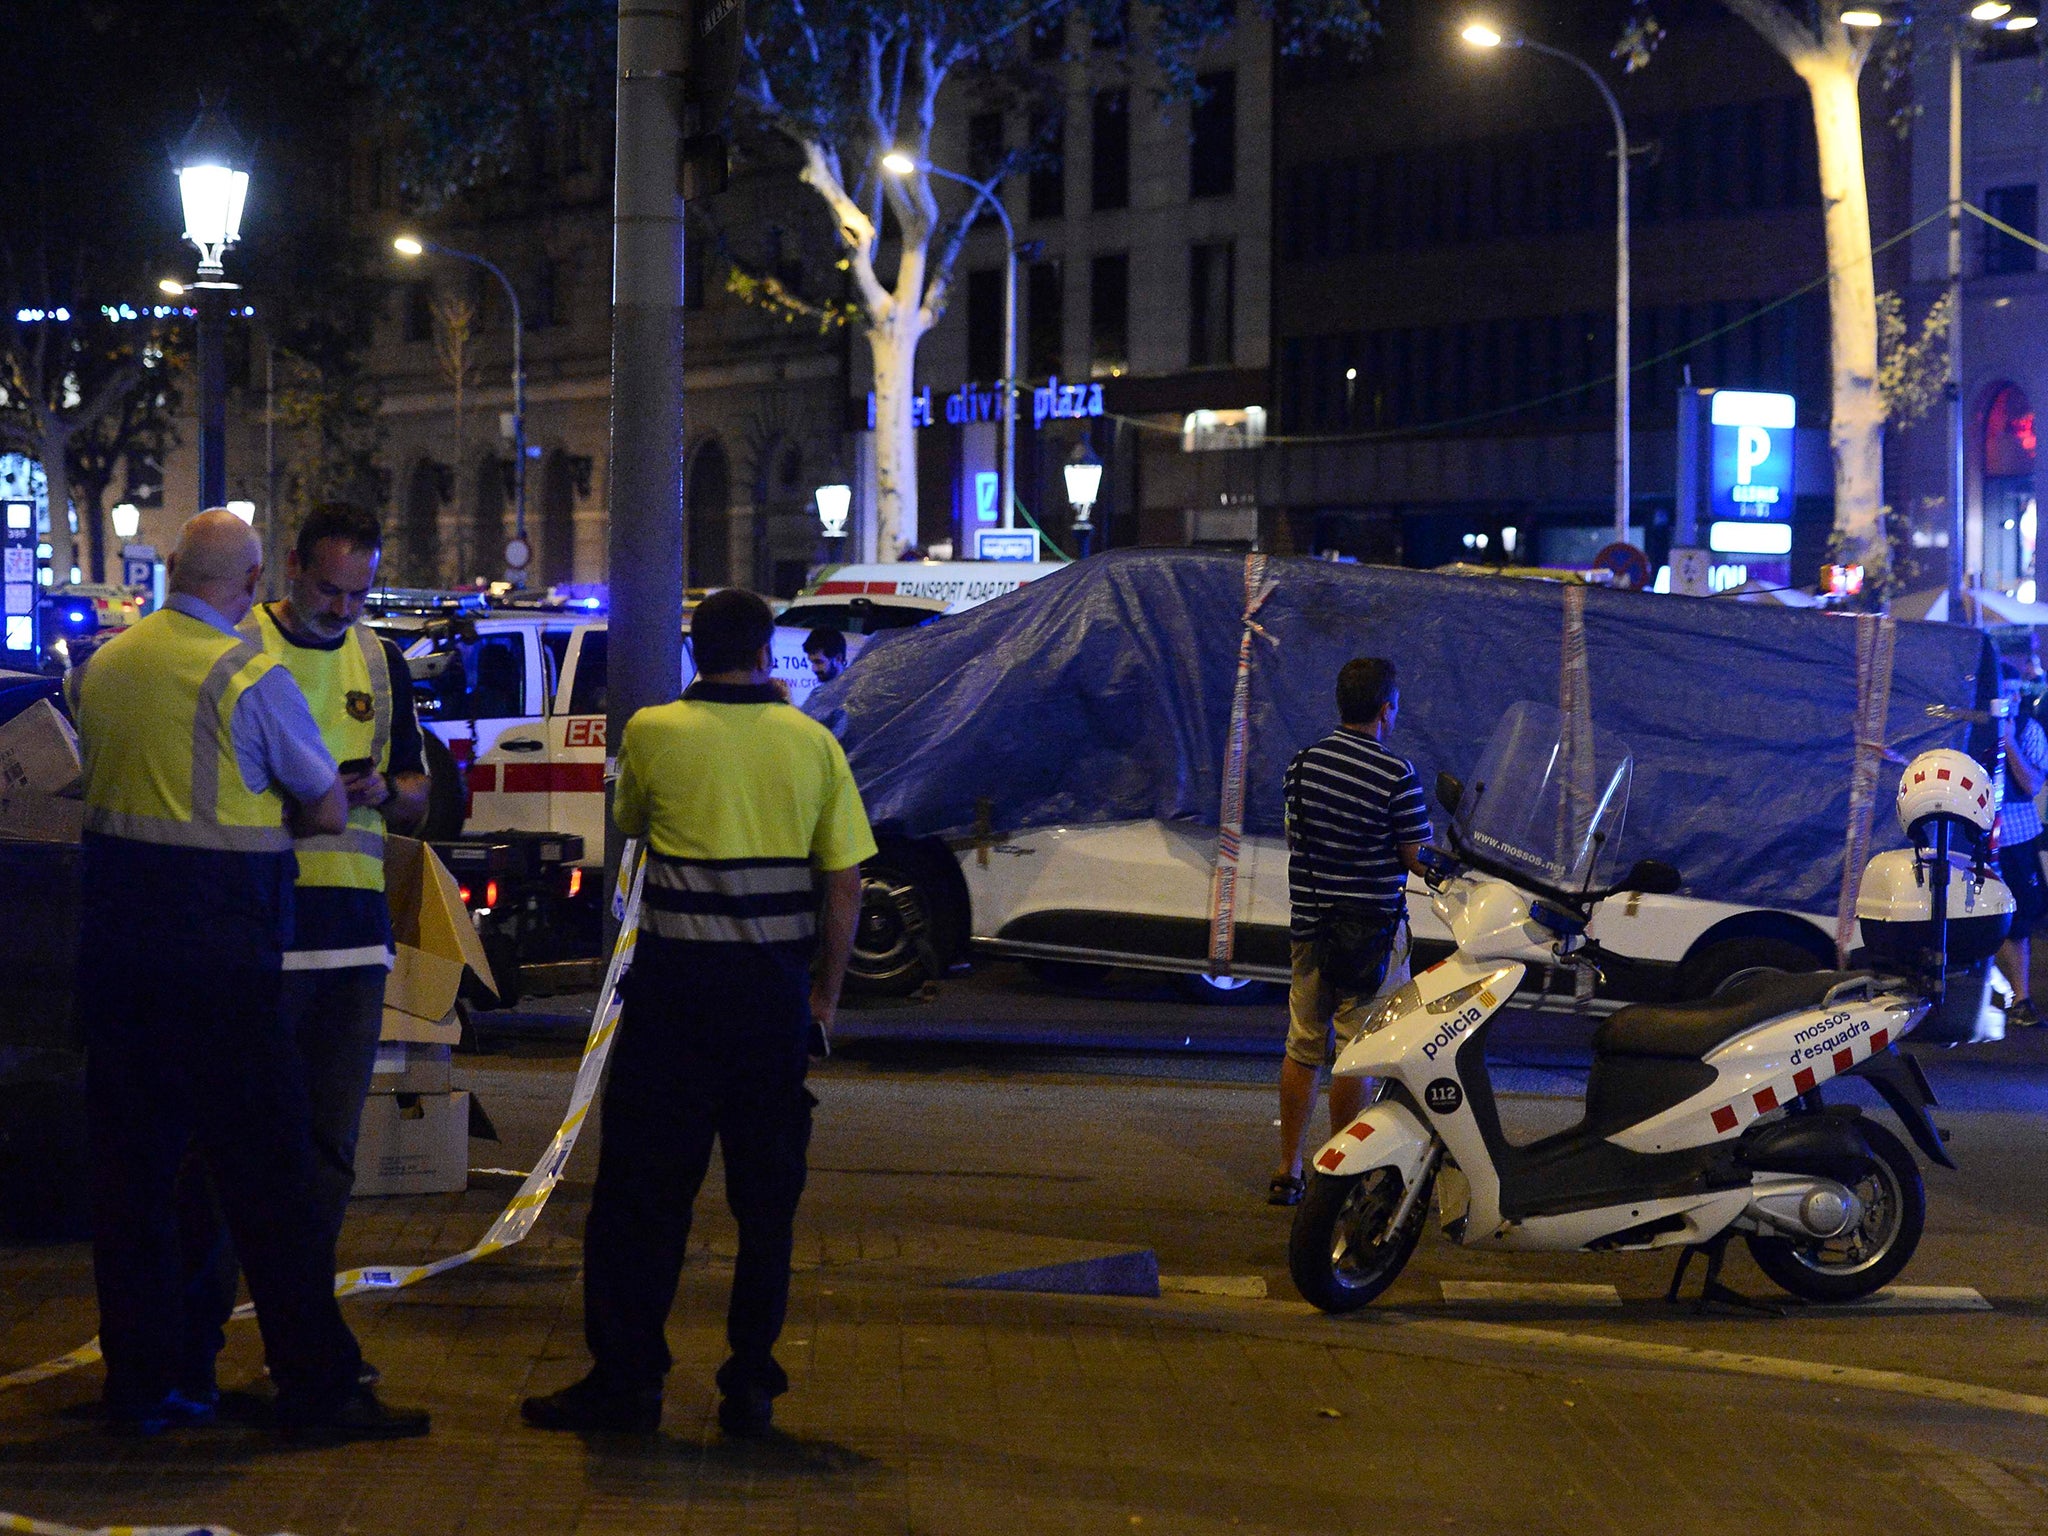 The van that ploughed into the crowd, killing 13 people and injuring around 100 others, is towed away from La Rambla in Barcelona